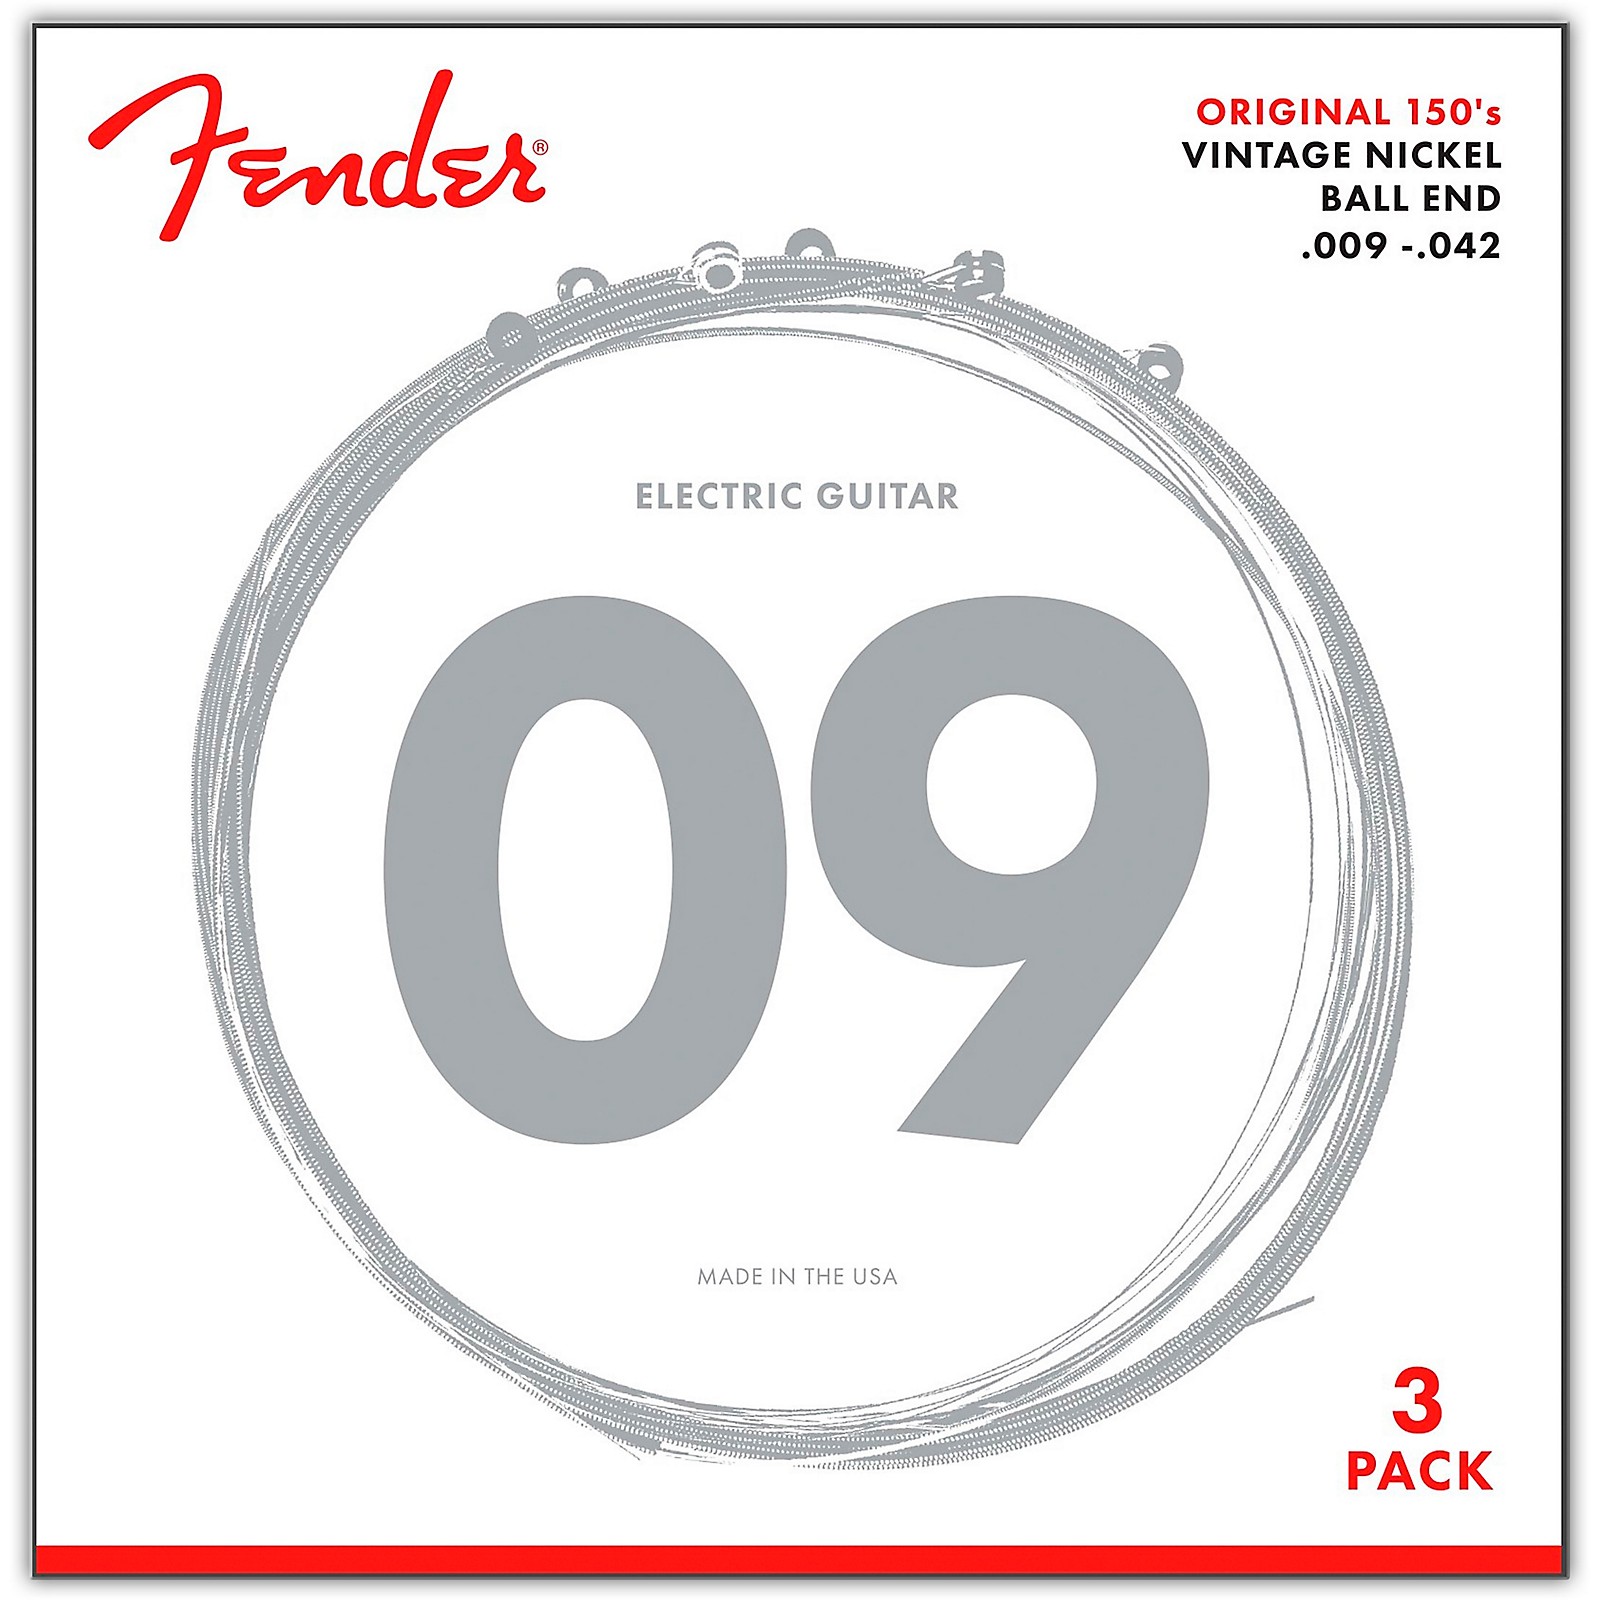 Signature Series 0.5 x 4.5 x 4.5 inches Nickel-Plated Electric Guitar Strings Product Dimensions